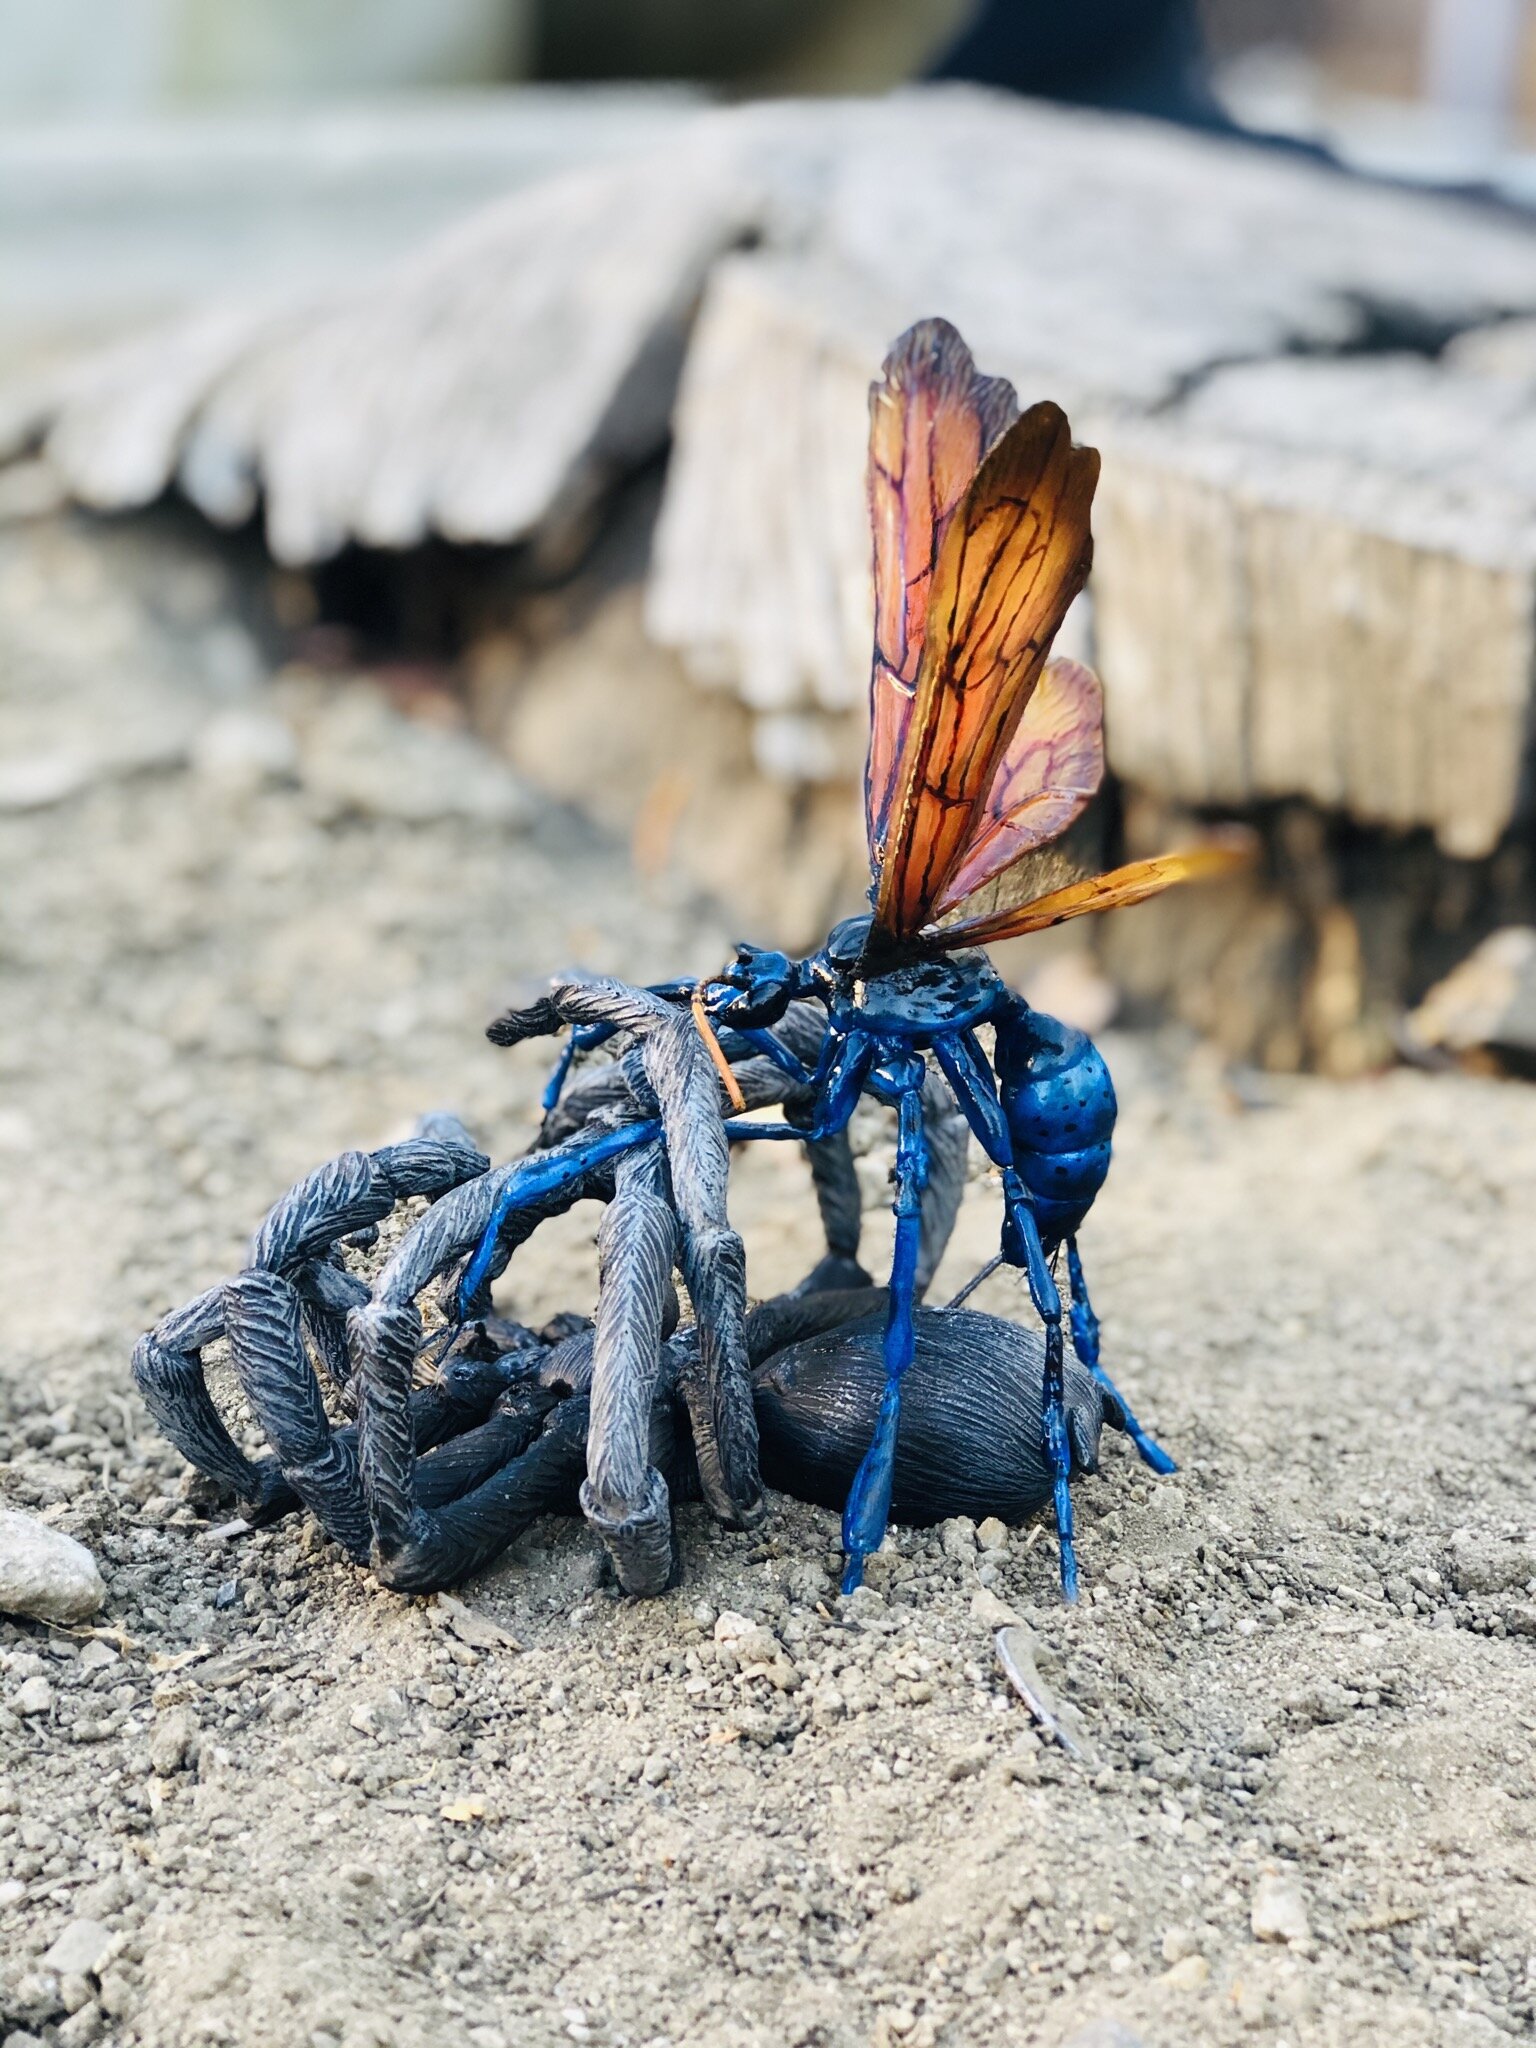  Third and final stage of the battle between Tarantula Hawk Wasp and Tarantula. Done for Aliso Woods and Canyon Park in Orange County, CA 